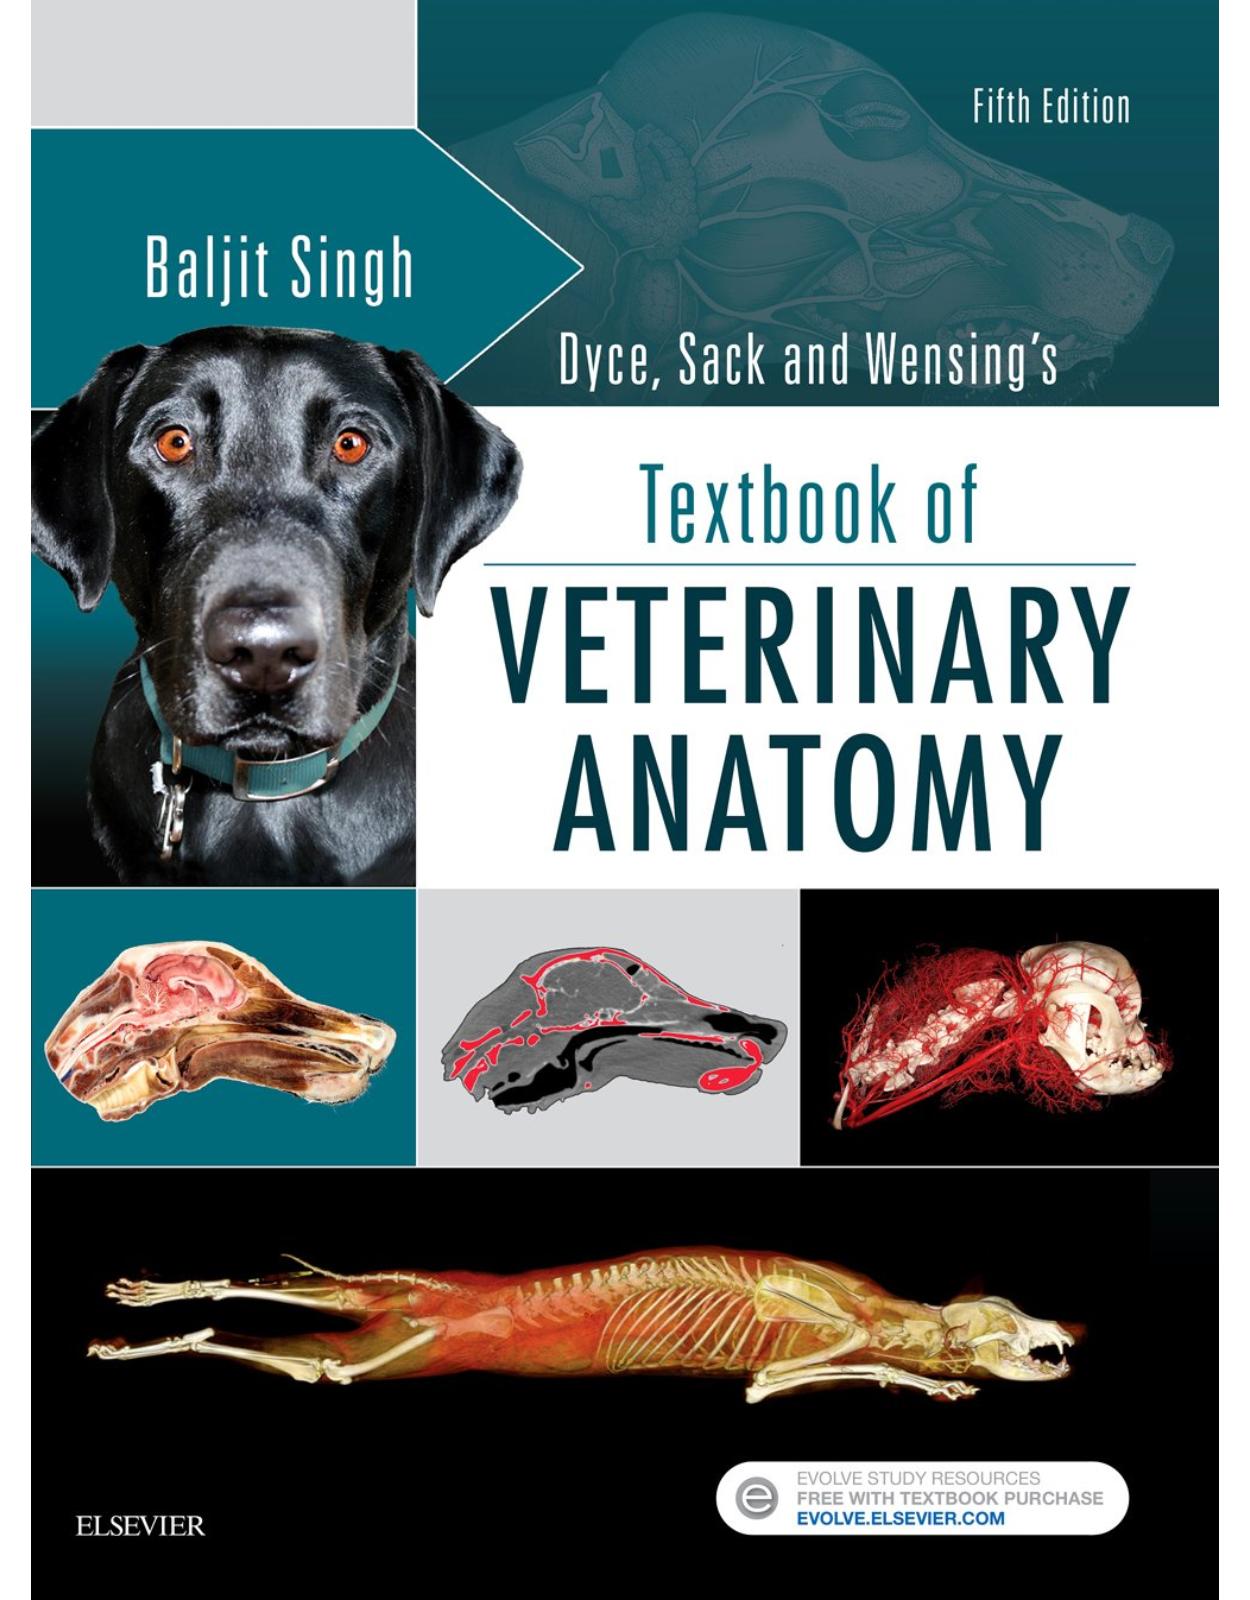 Dyce, Sack, and Wensing's Textbook of Veterinary Anatomy, 5e